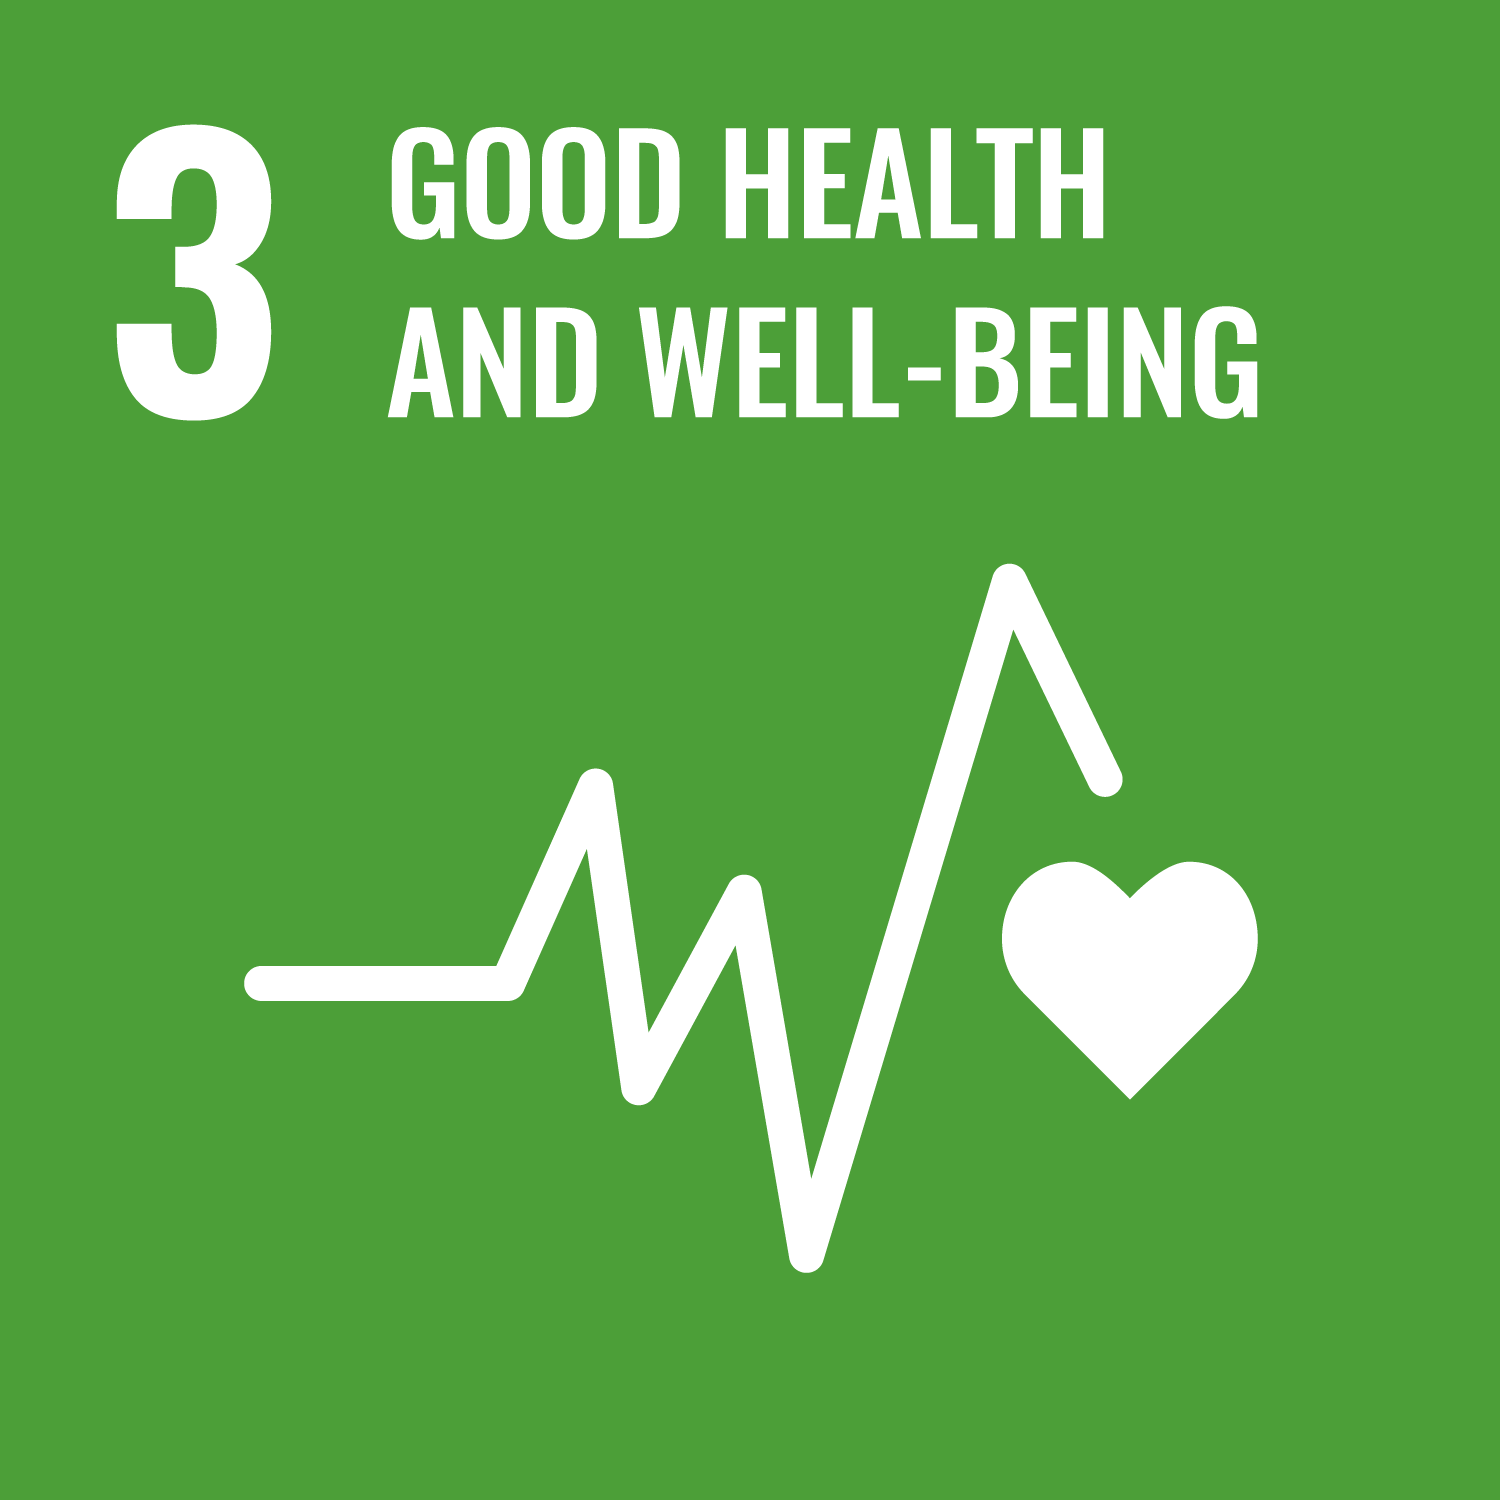 3: Good Health and Well-Being